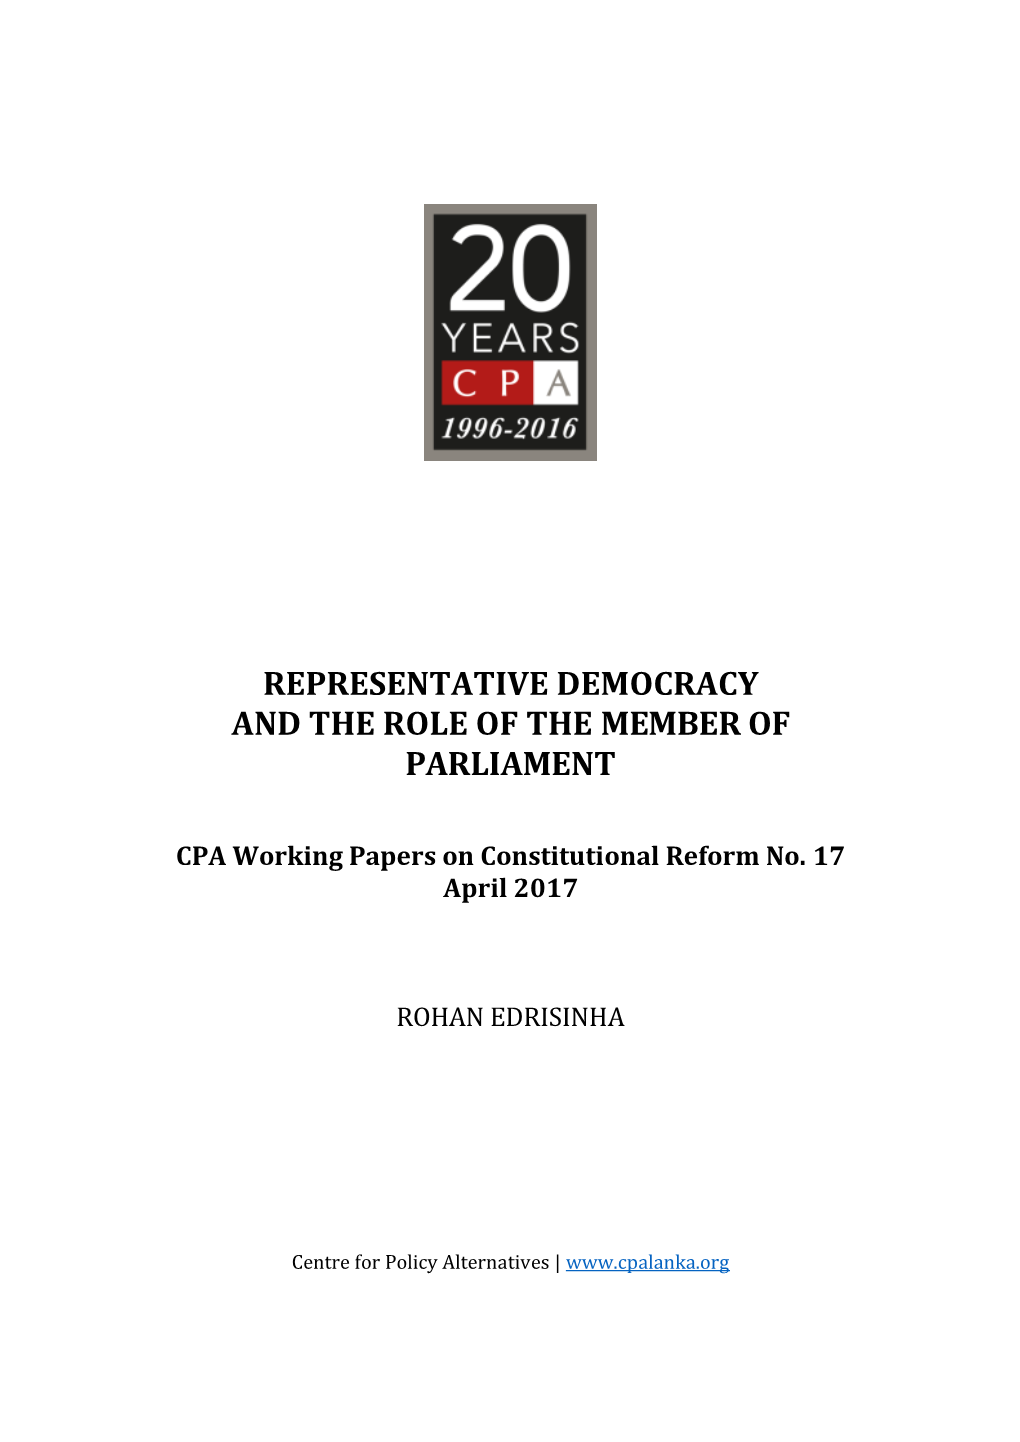 Representative Democracy and the Role of the Member of Parliament